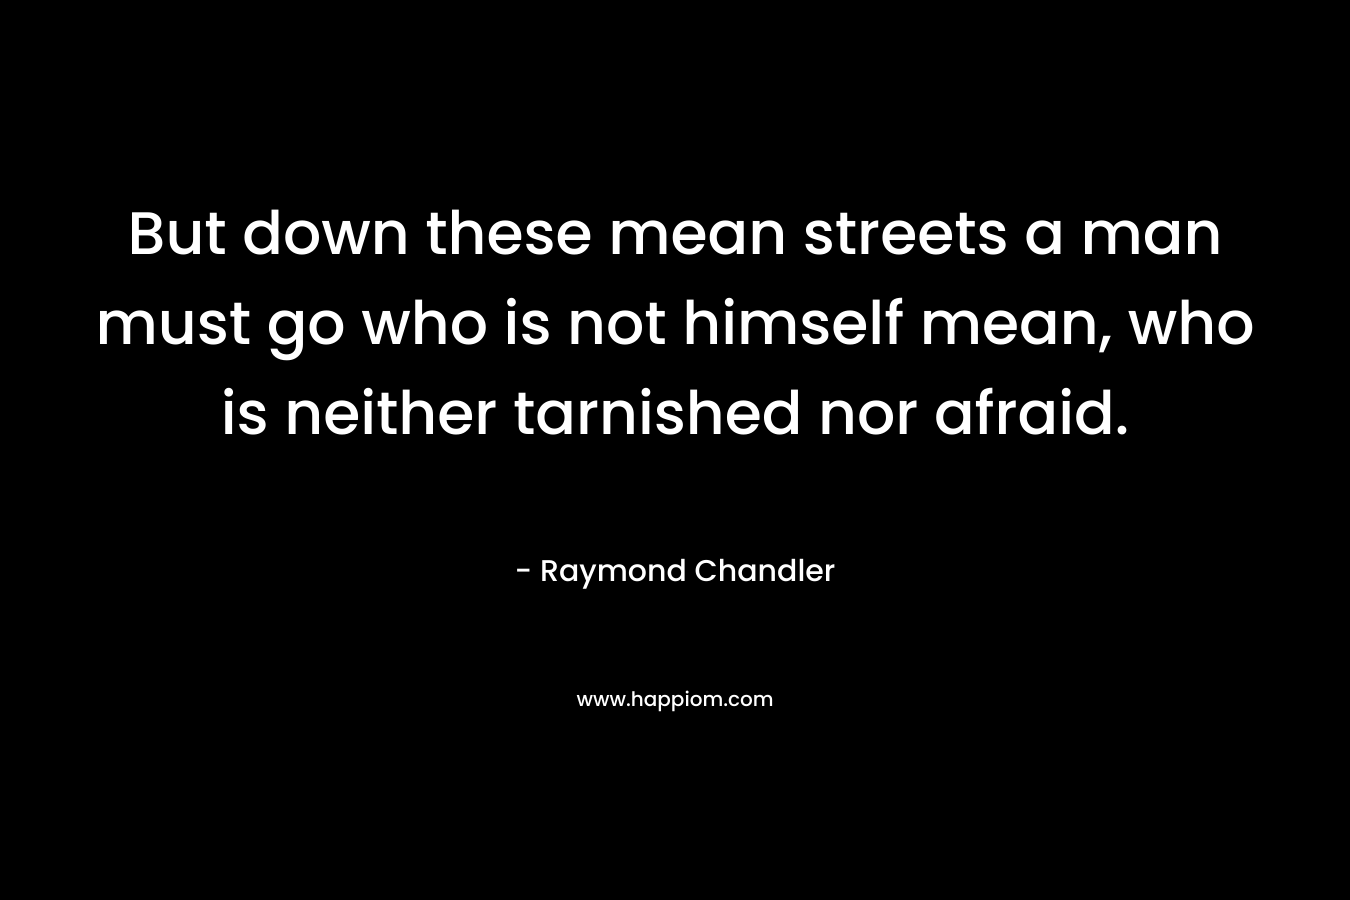 But down these mean streets a man must go who is not himself mean, who is neither tarnished nor afraid. – Raymond Chandler